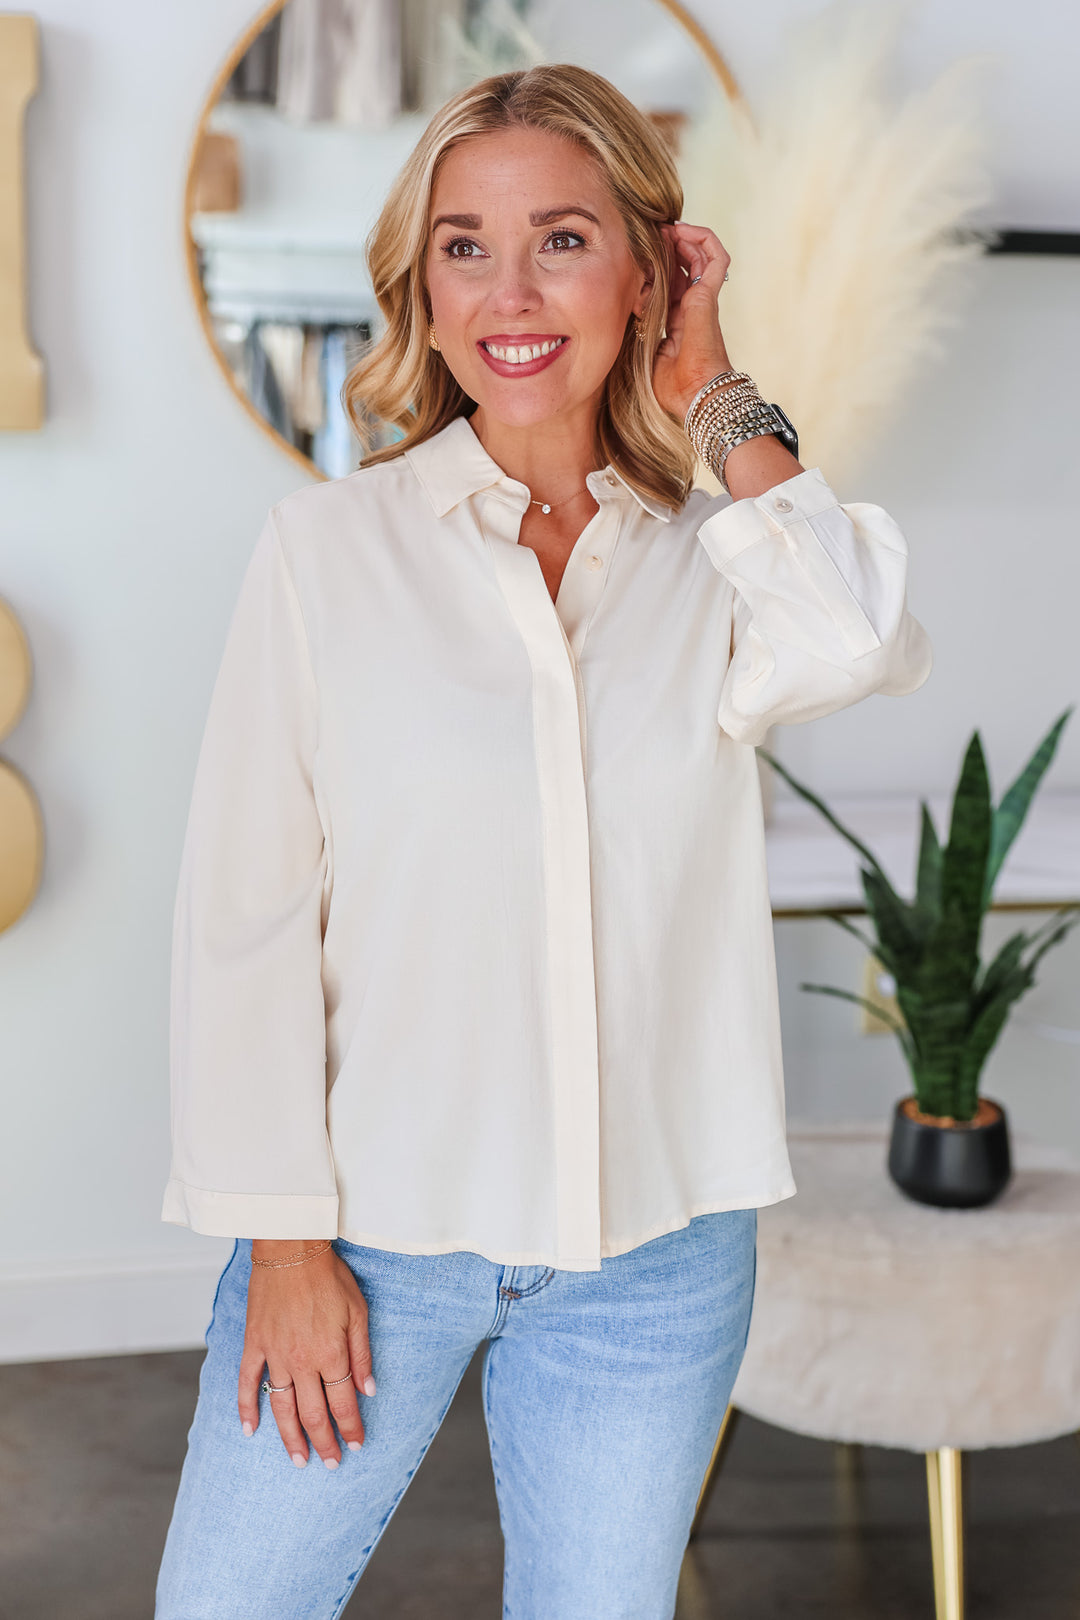 A blonde woman standing in a shop wearing a cream colored button down with blue jeans.